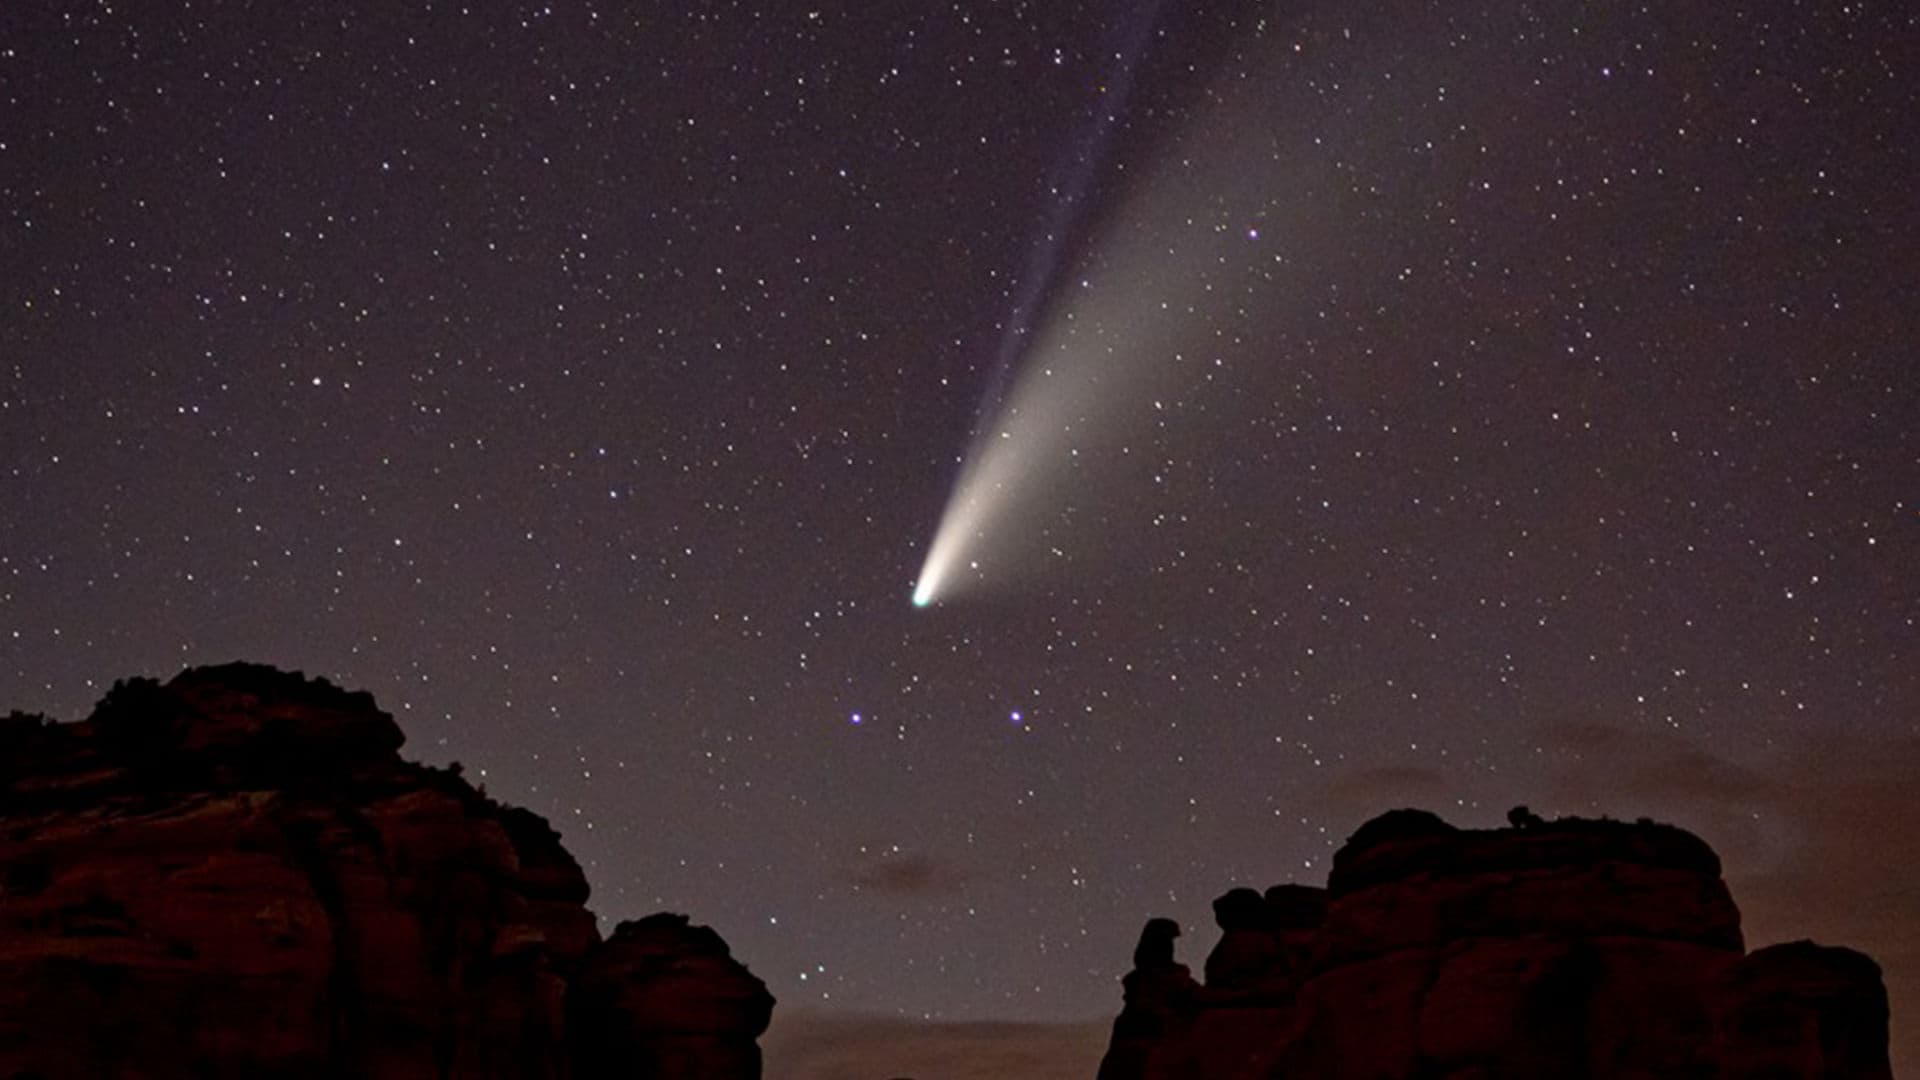 The List of 5 Last Great Comets